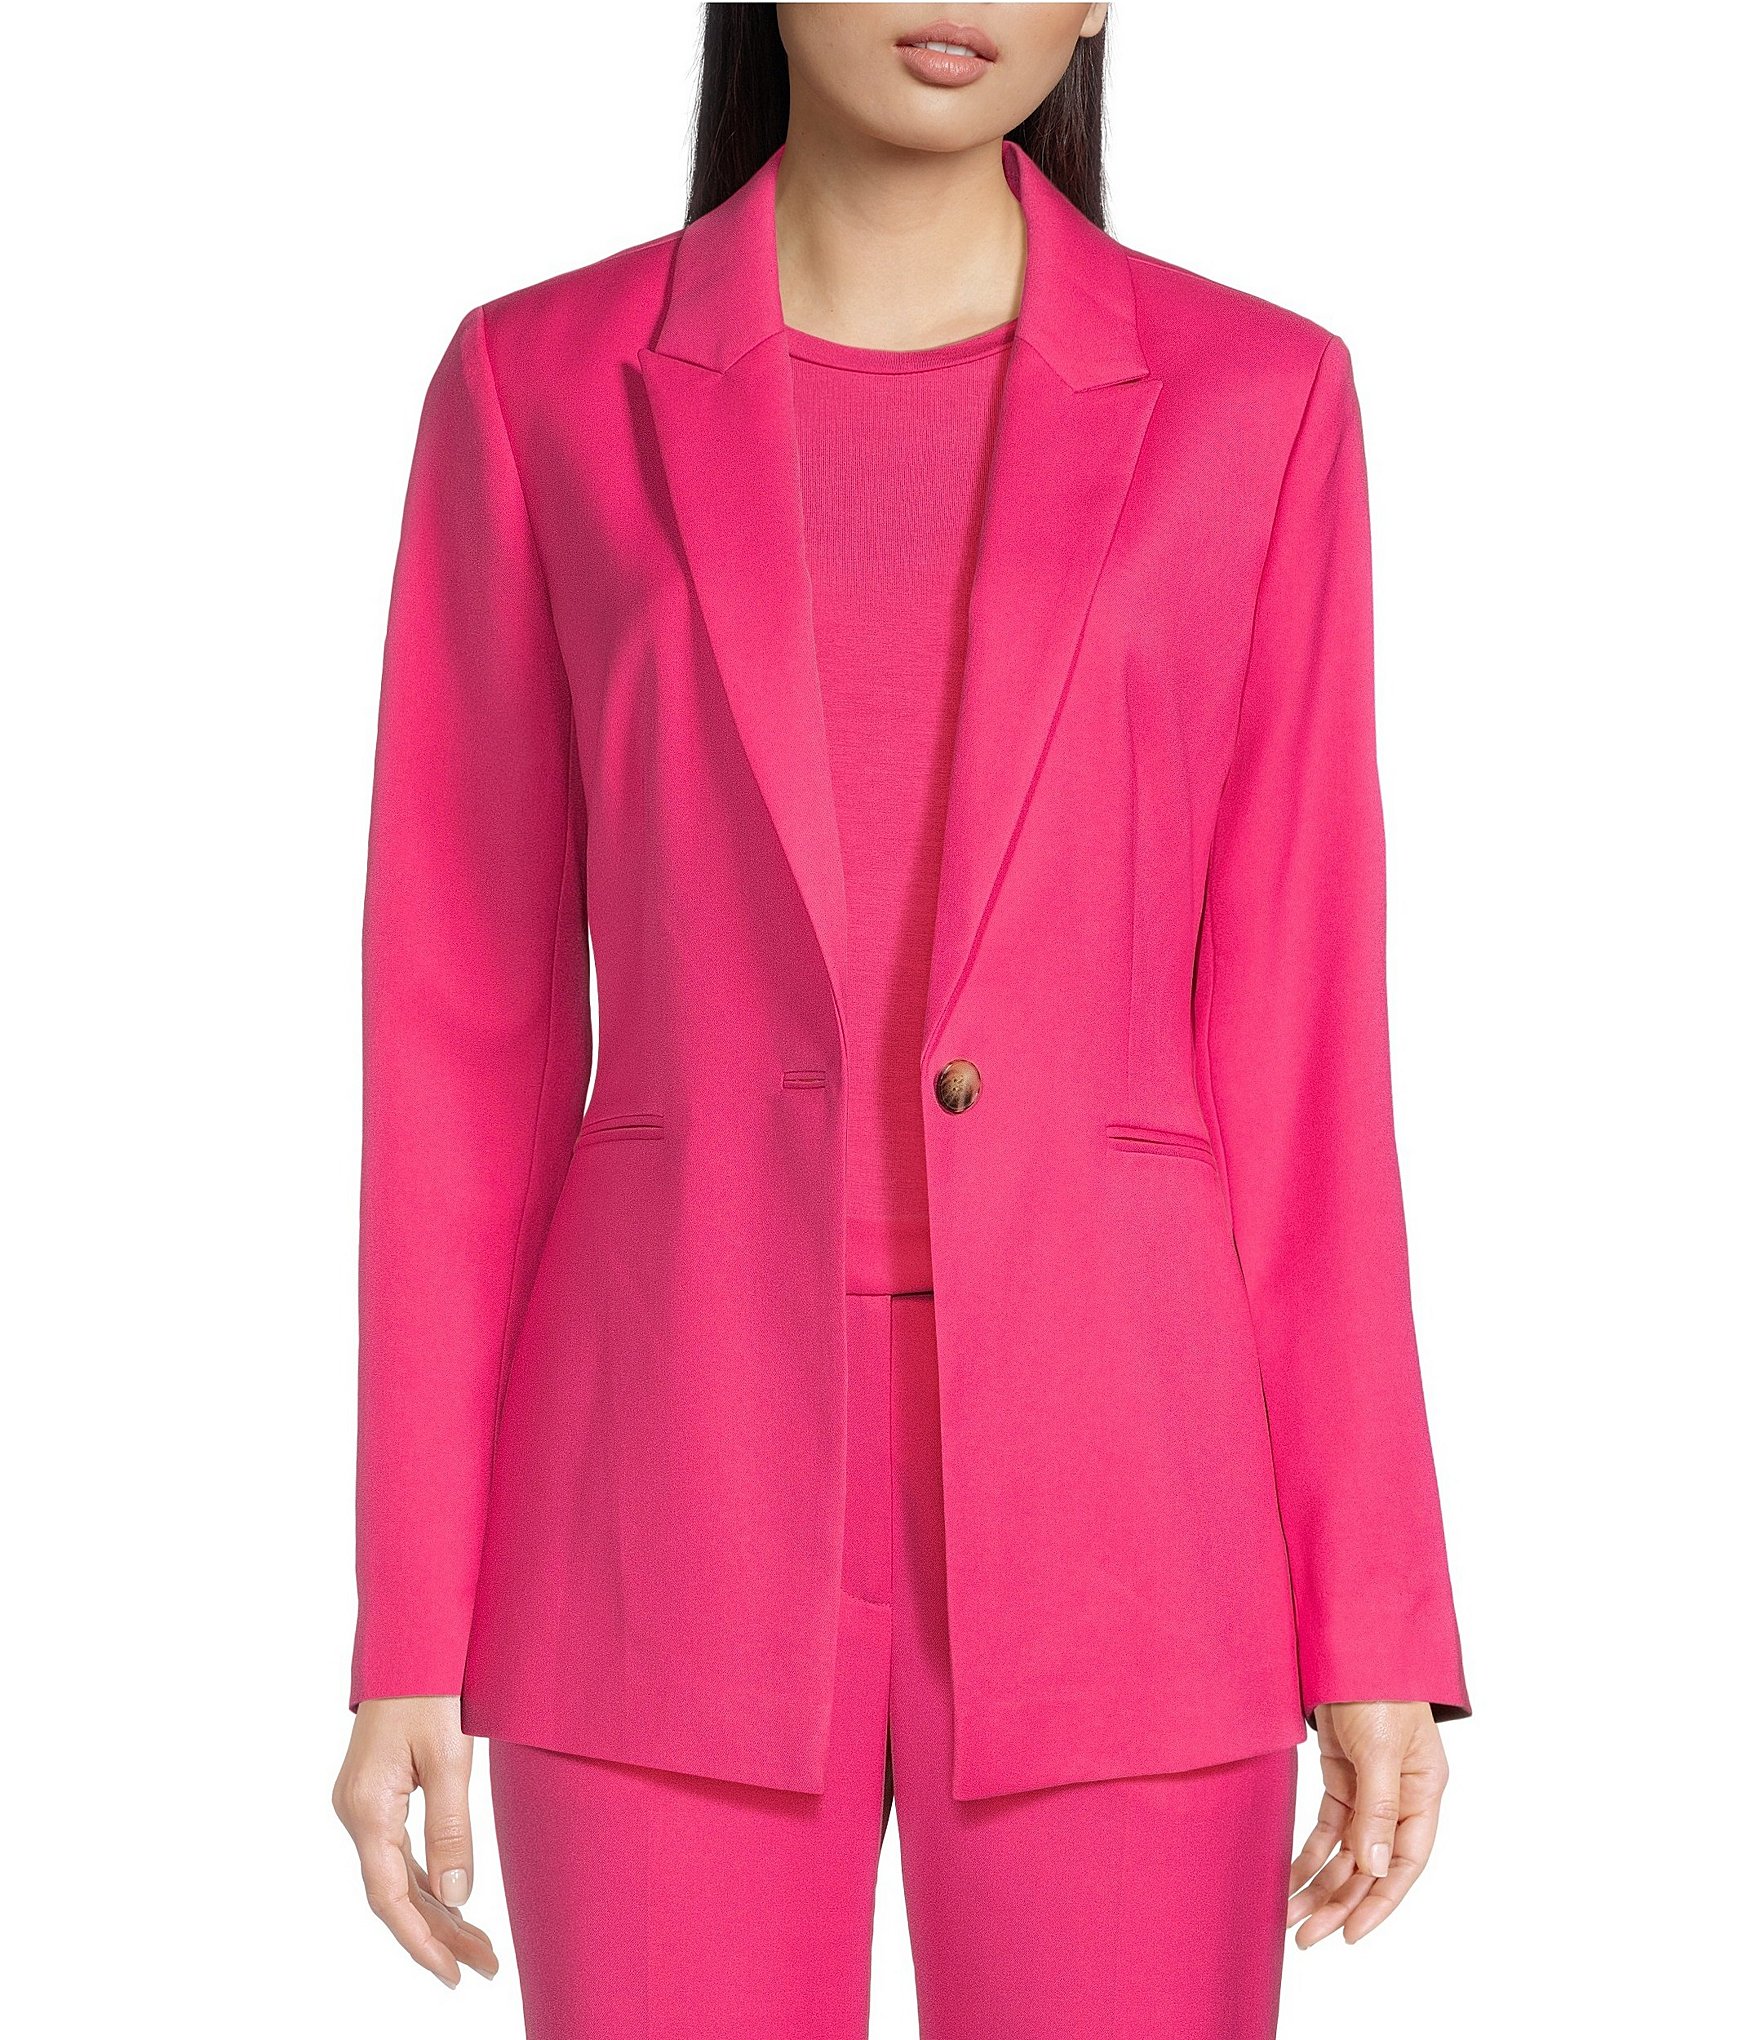 Hot Pink Bell Bottom Pants Suit Set With Blazer, Tall Women Pink Blazer  Trouser Suit, White Trouser Set for Women, Pants Suit Set Womens -   Hong Kong